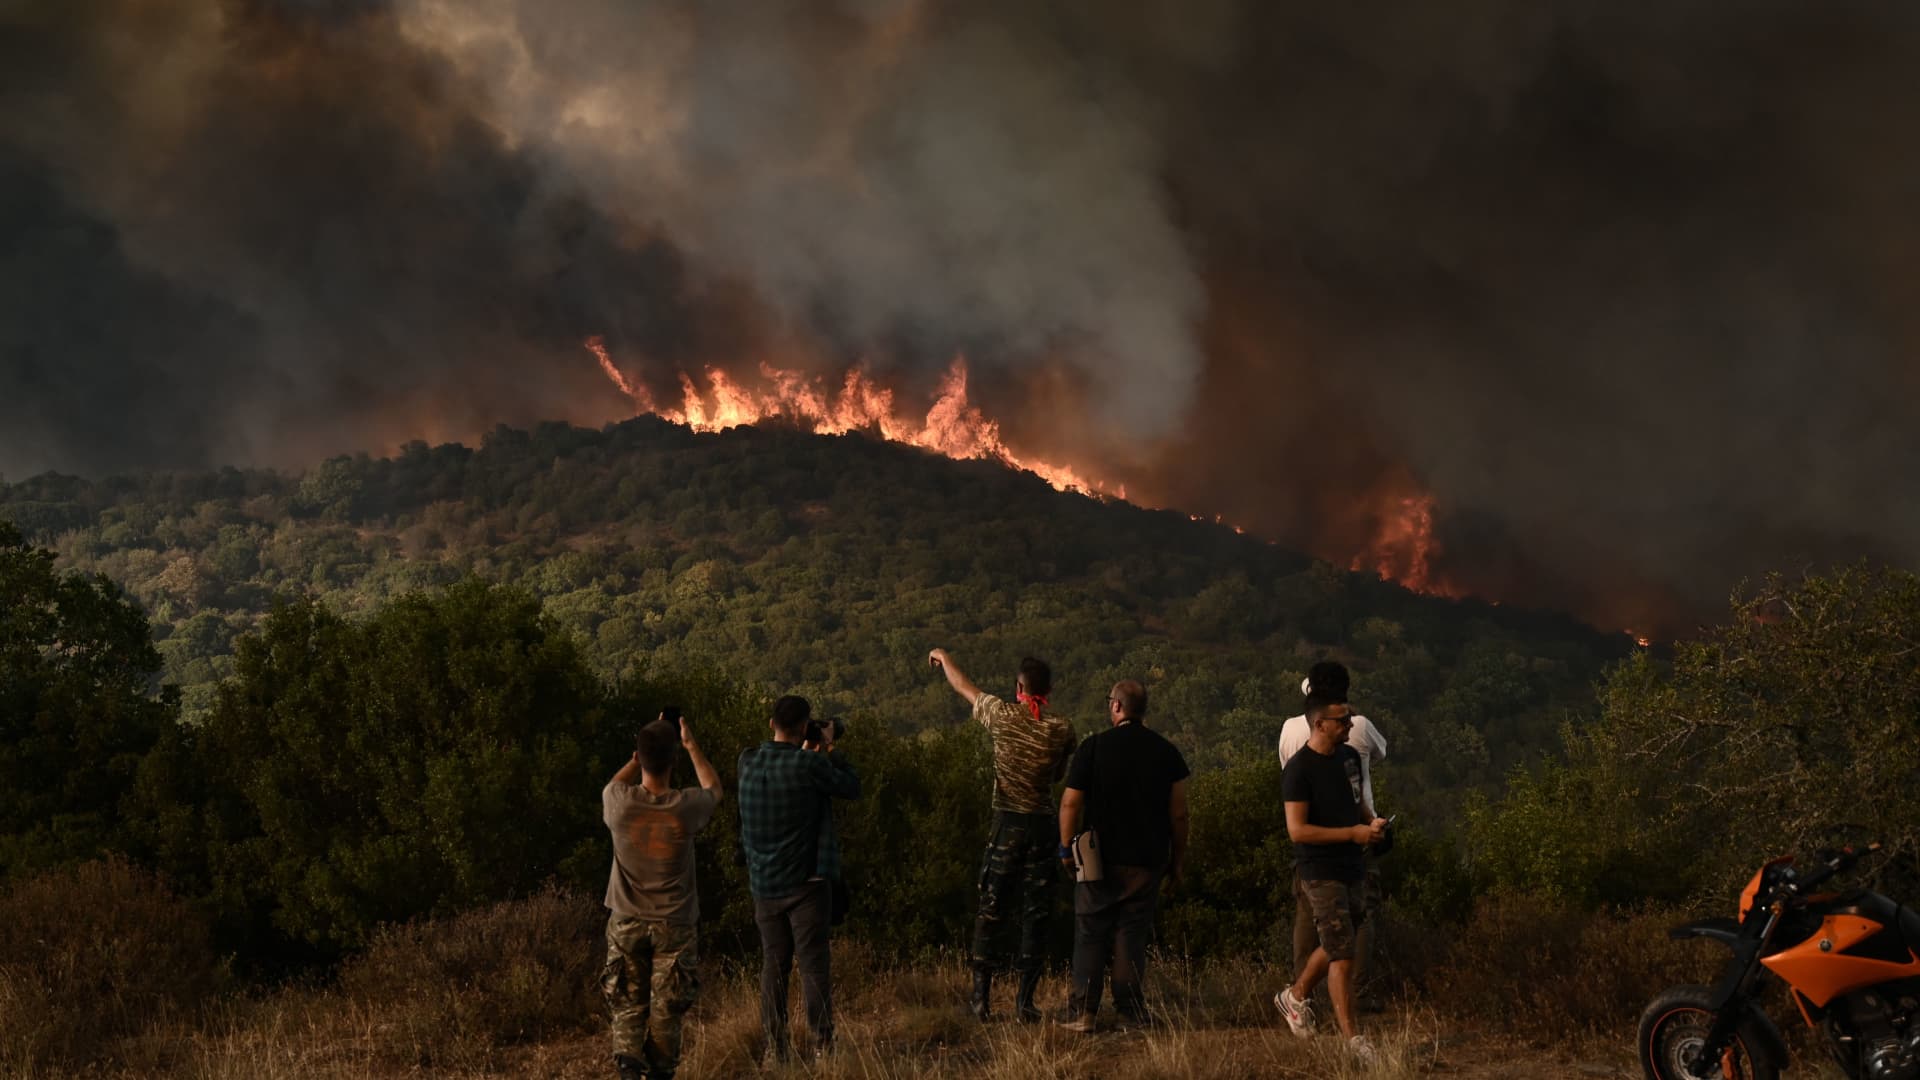 People look at the wildfire raging in a forest in Sikorahi, near Alexandroupoli, northern Greece, on August 23, 2023.